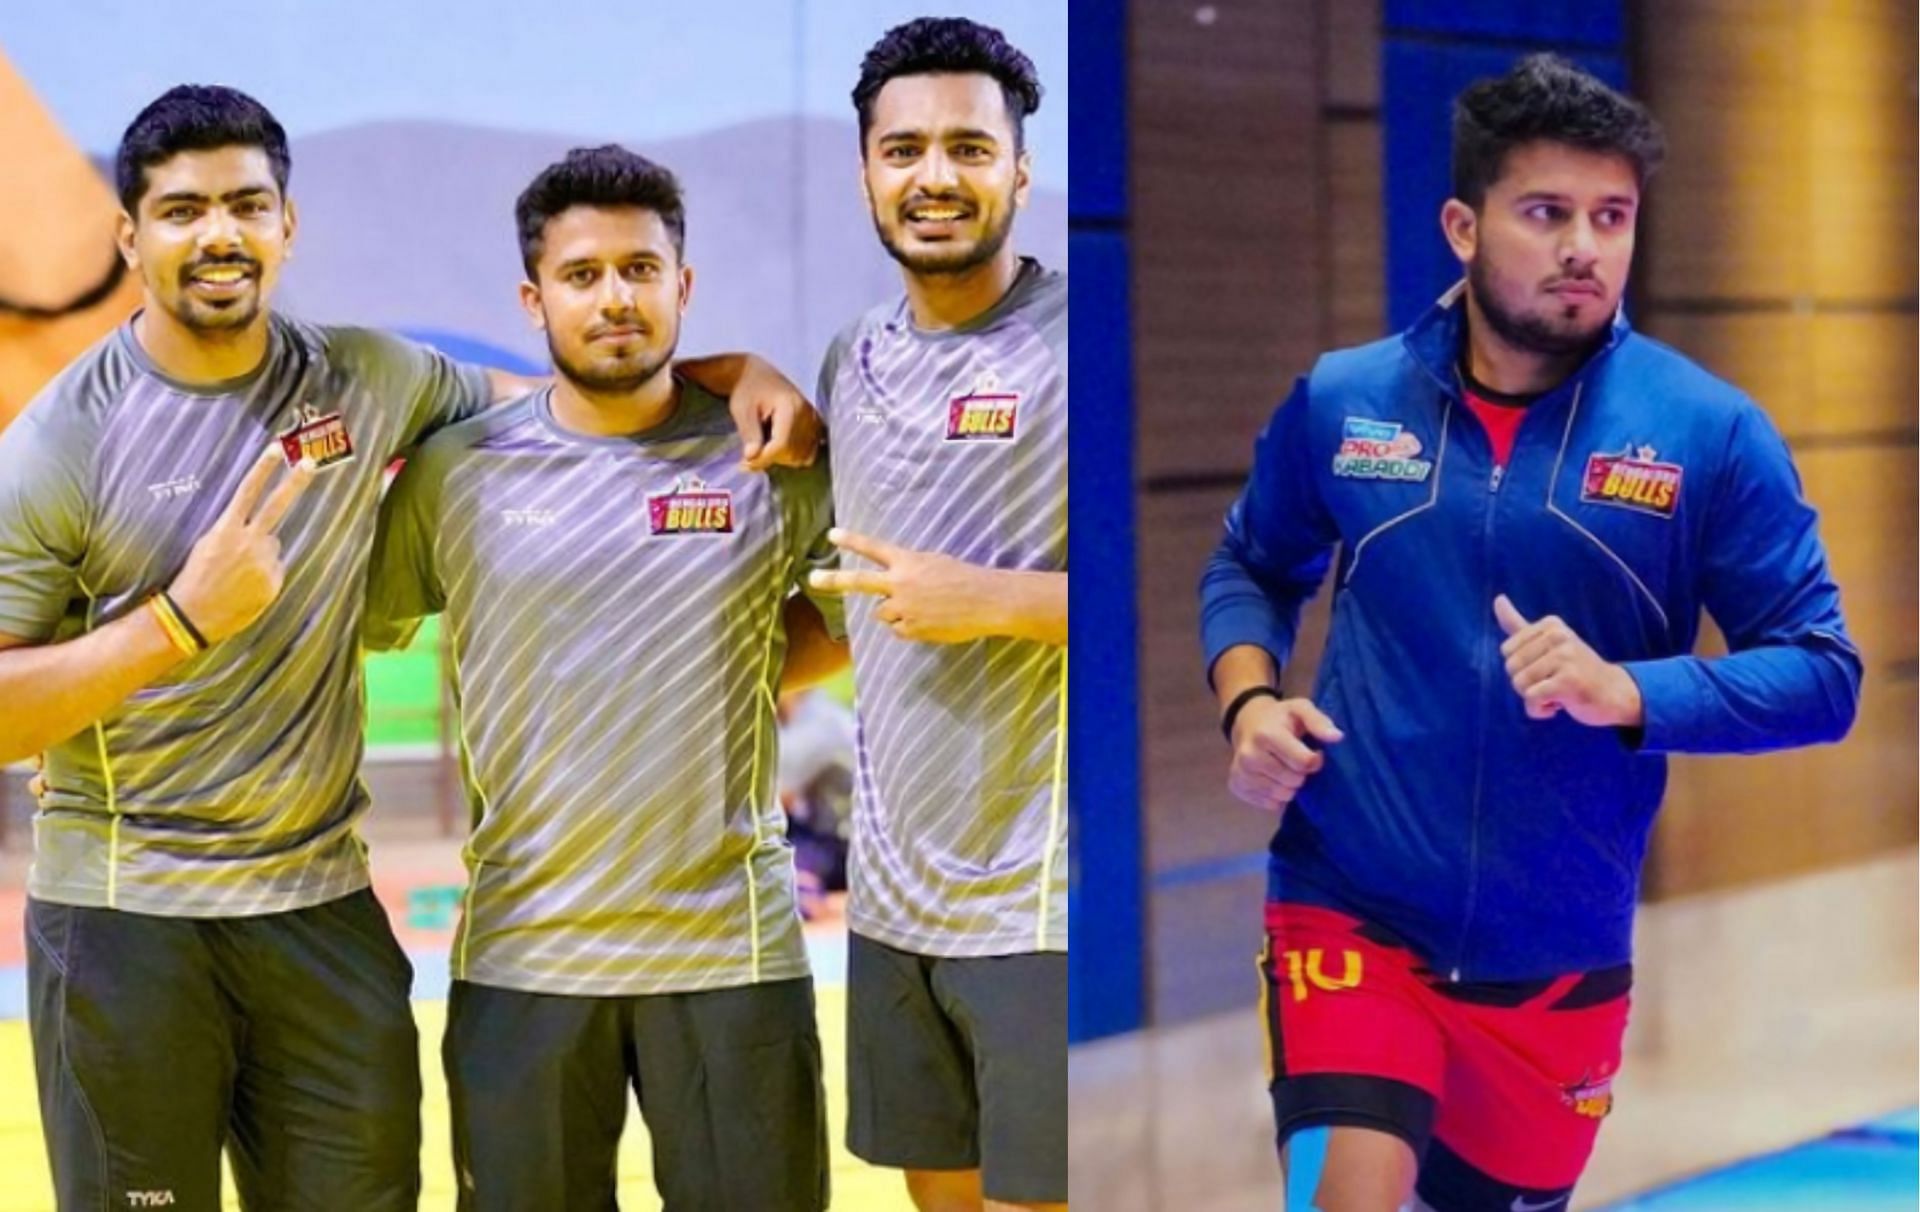 Ankit (R) is waiting for his opportunity in Pro Kabaddi 2021